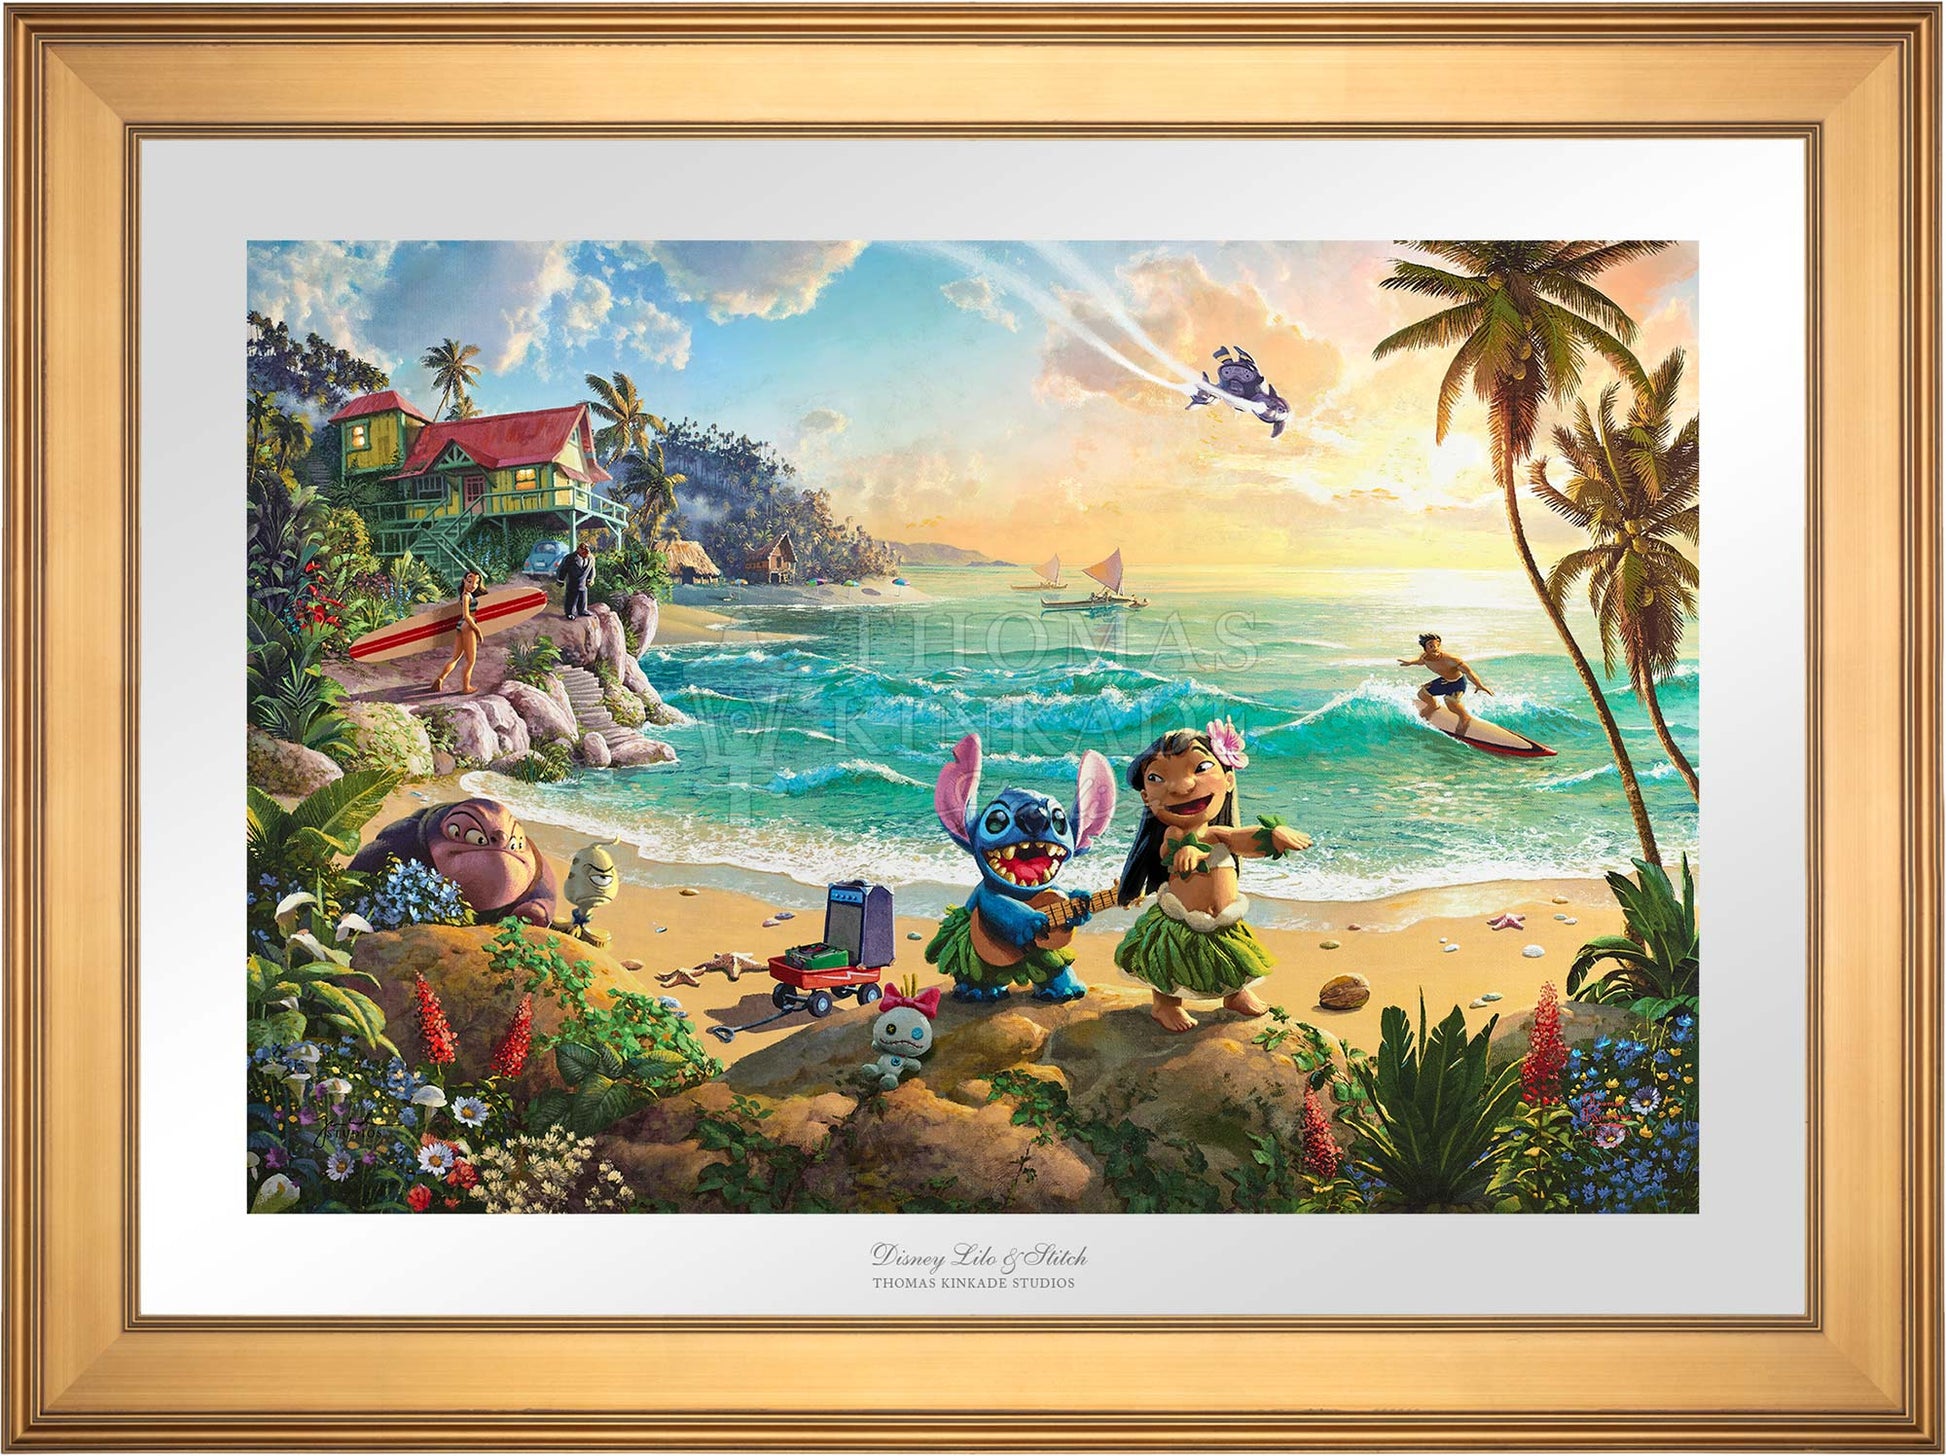 Stitch Merch Poster Art Wall Poster Sticky Poster Gift For Fan